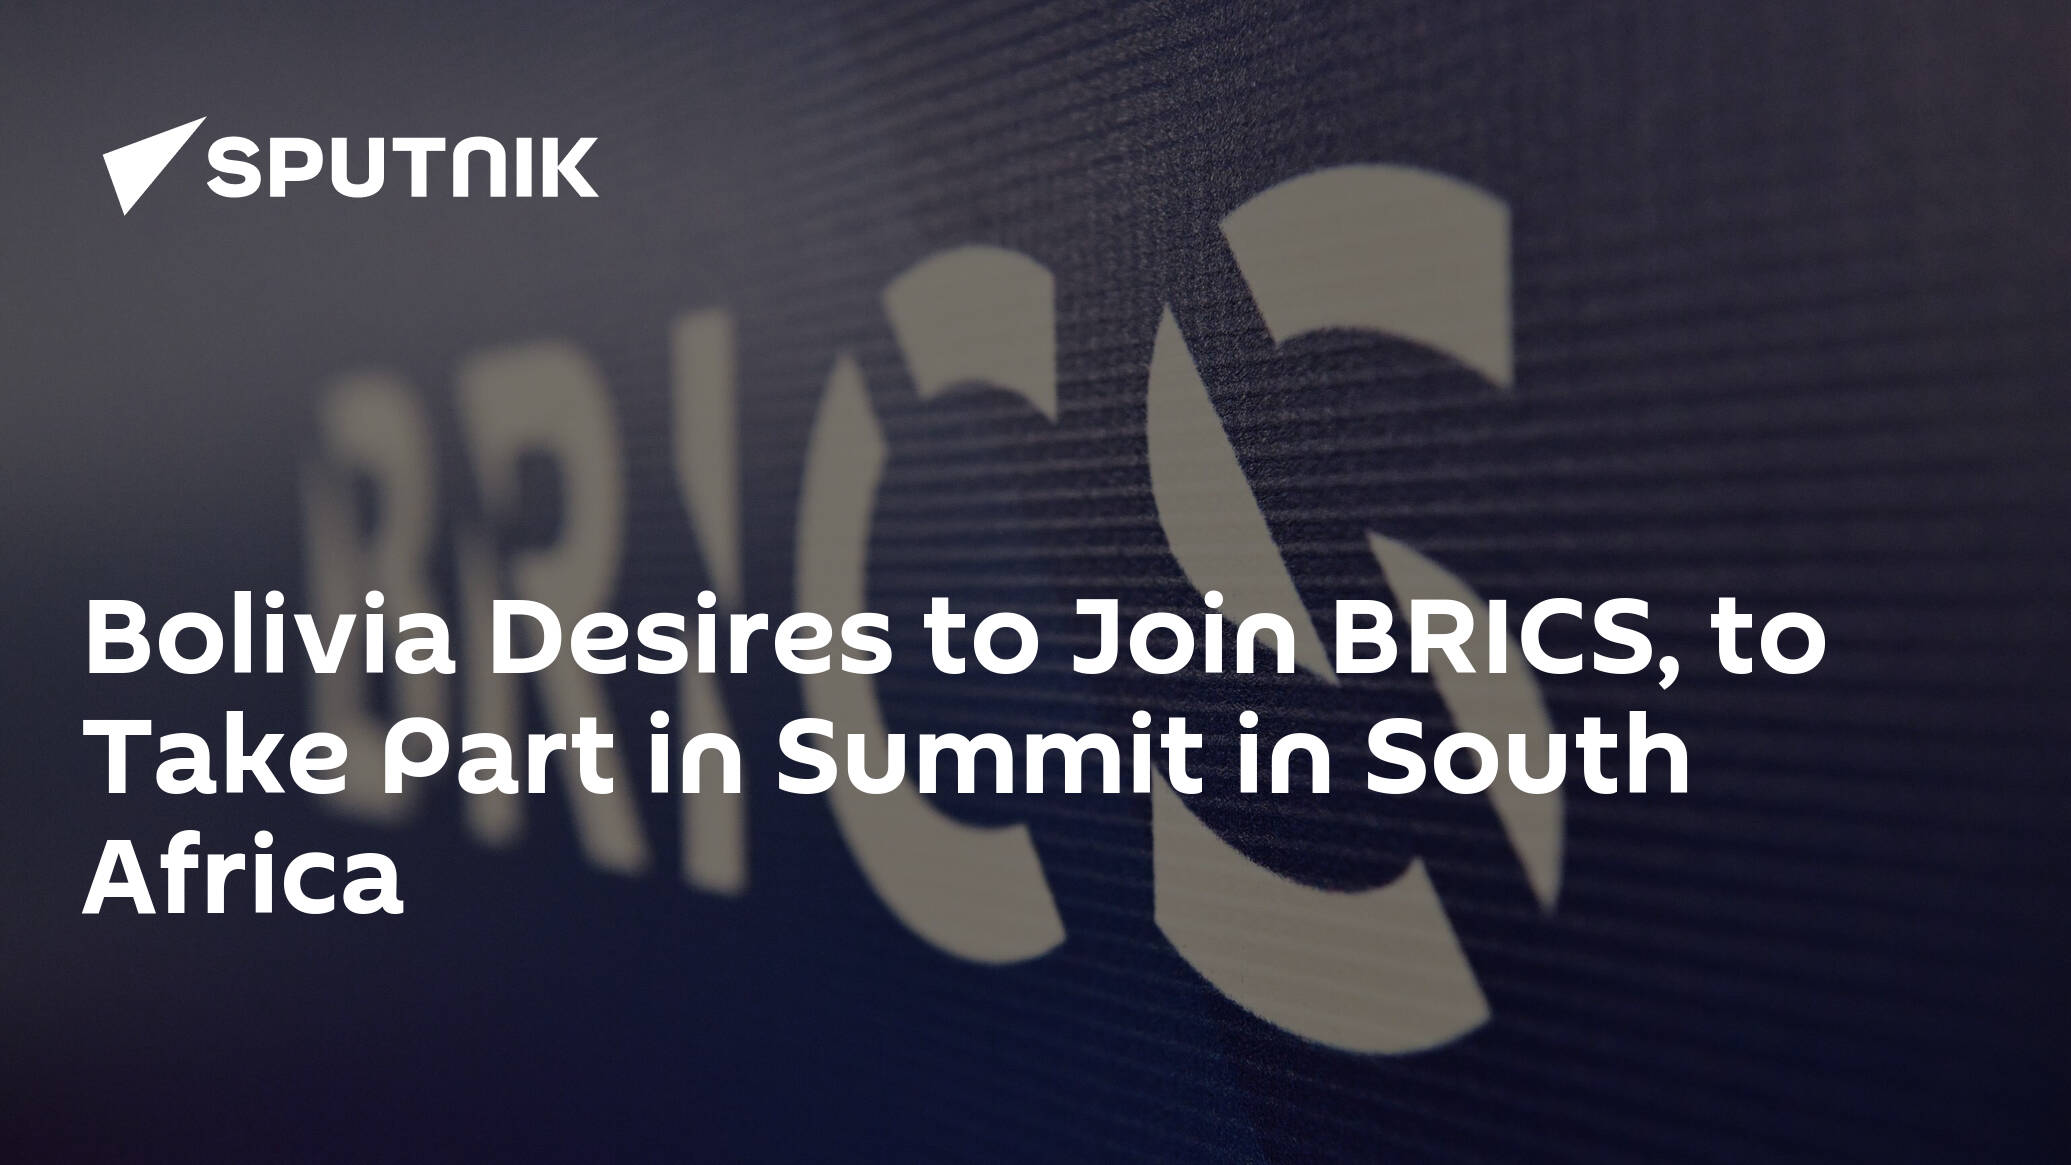 Bolivia Desires to Join BRICS, to Take Part in Summit in South Africa